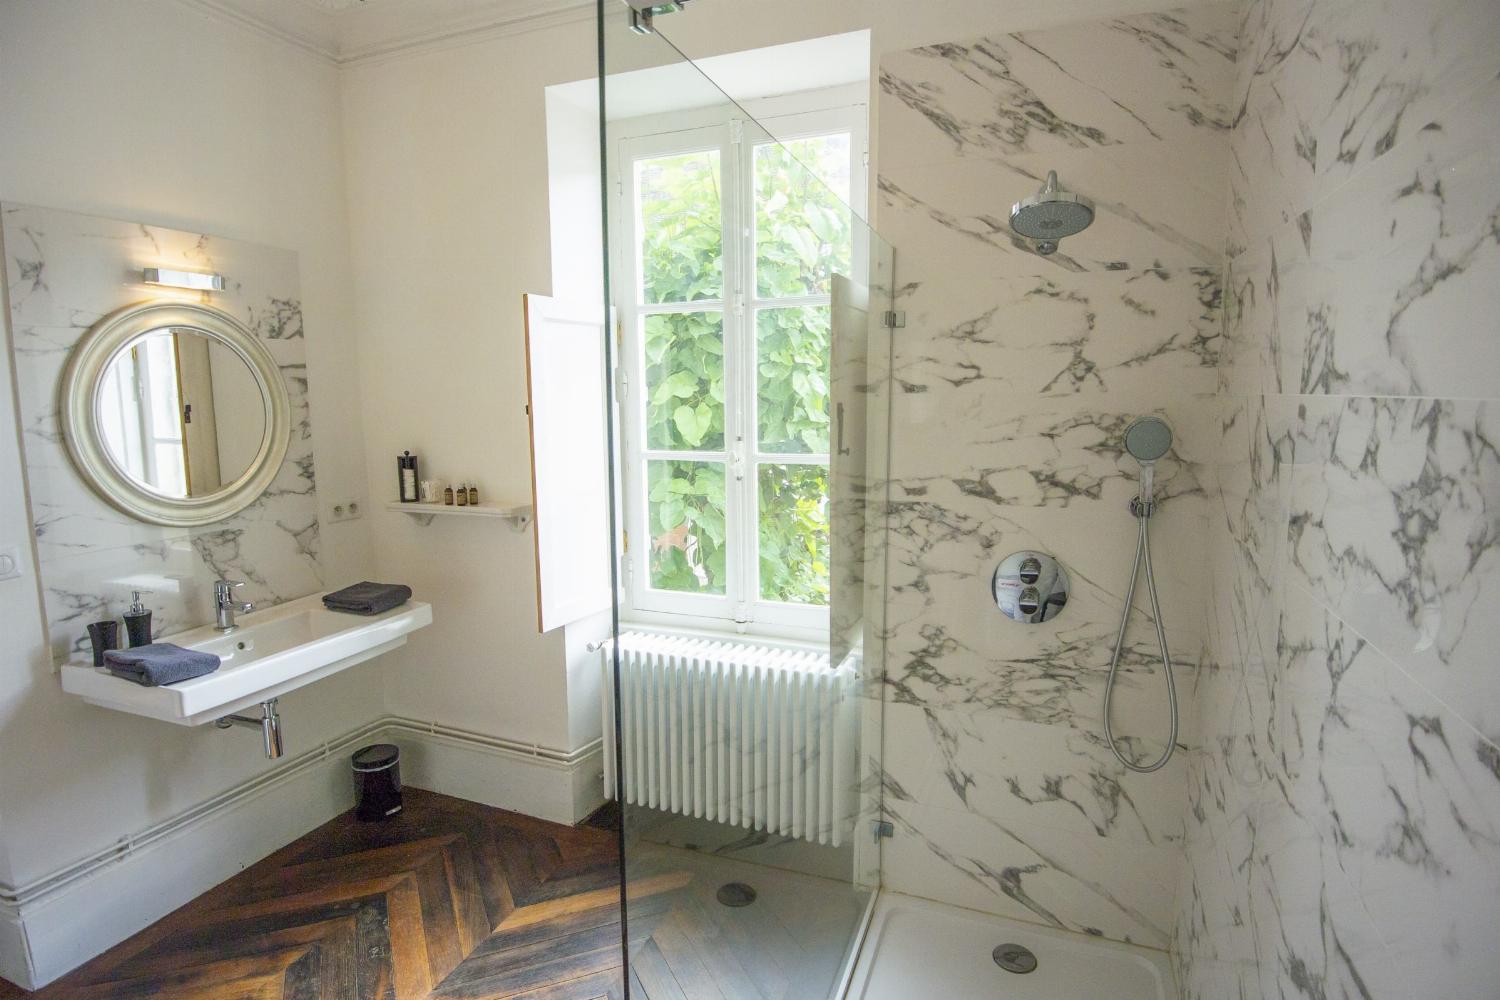 Bathroom | Self-catering accommodation in Pyrénées-Atlantiques